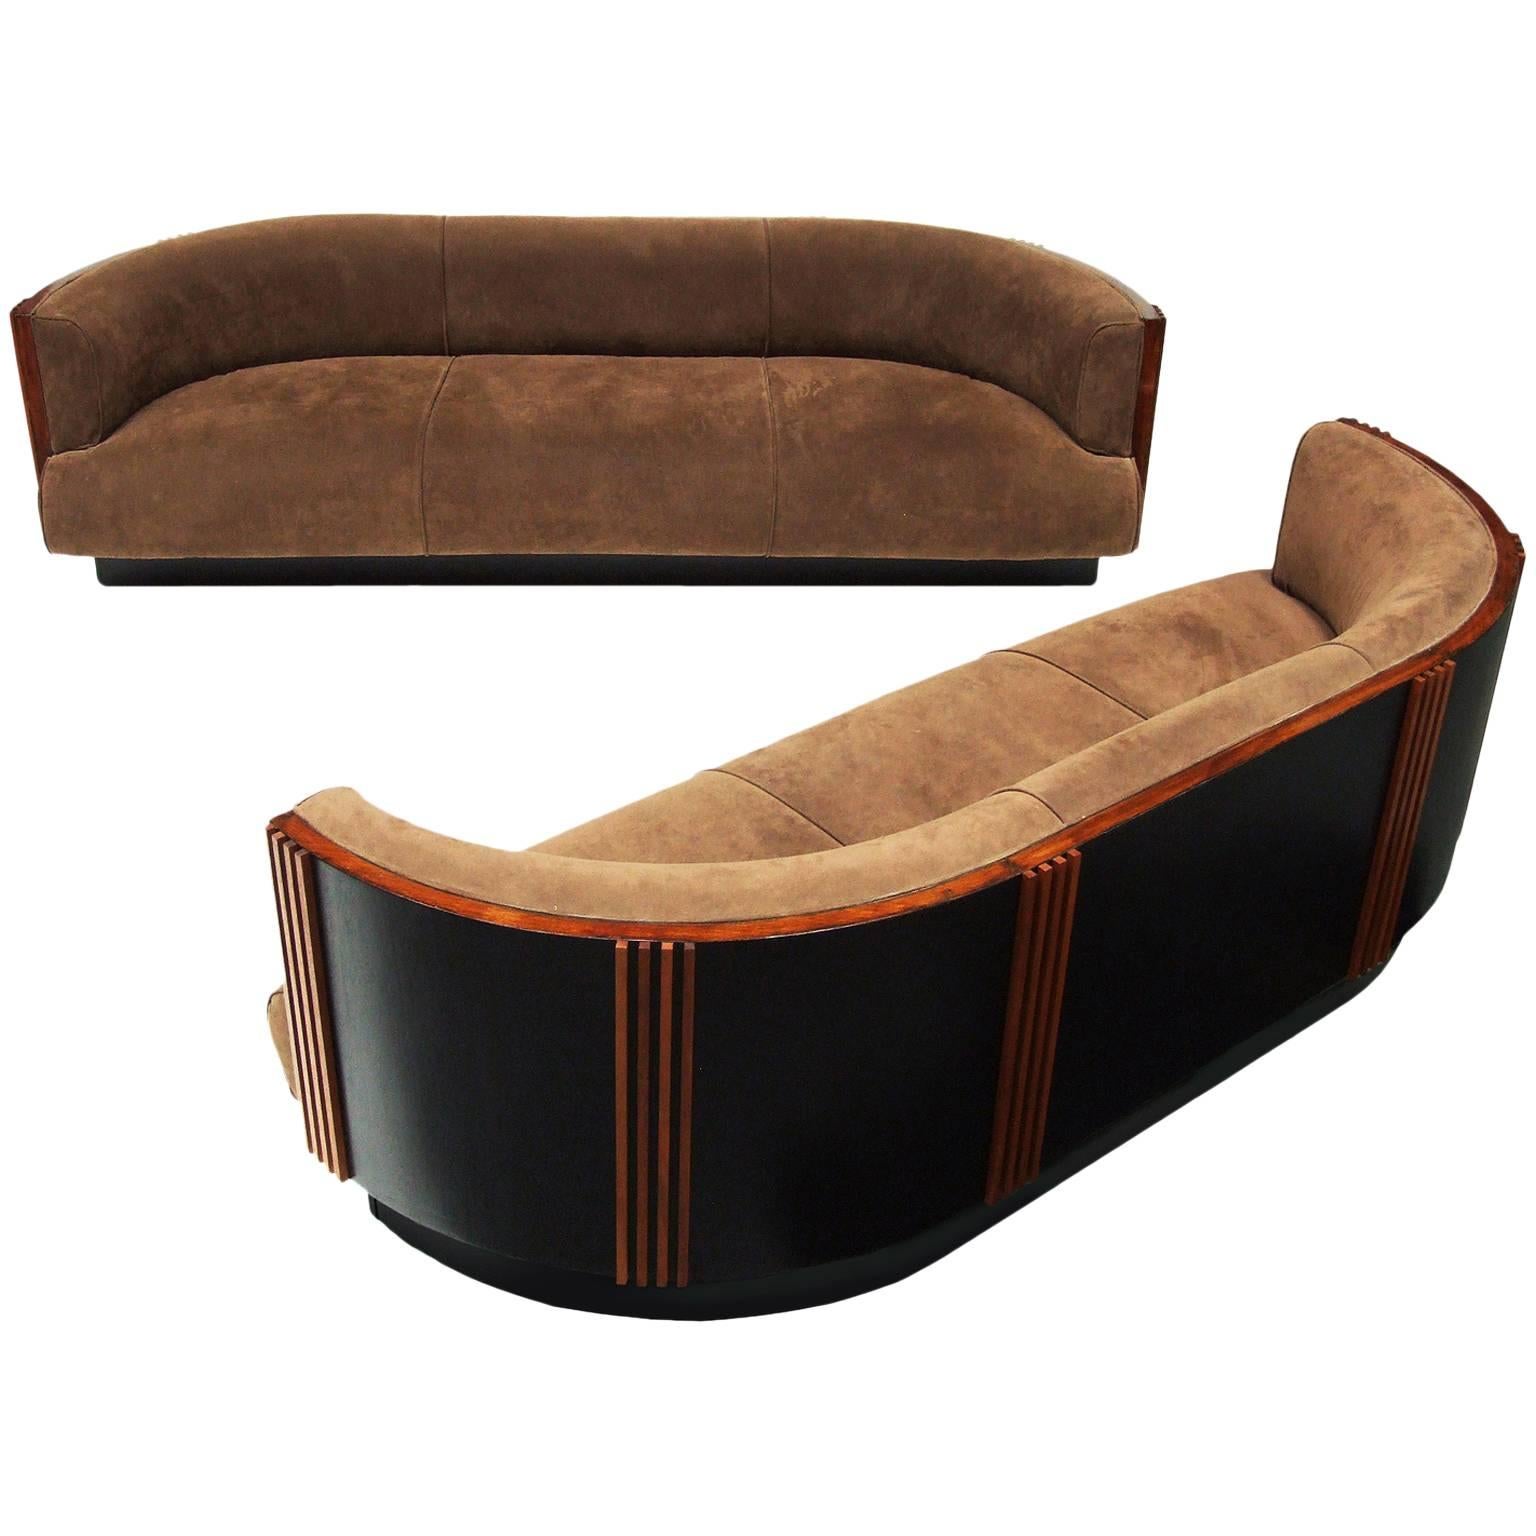 Pair of 1930s French Art Deco Curved Sofas